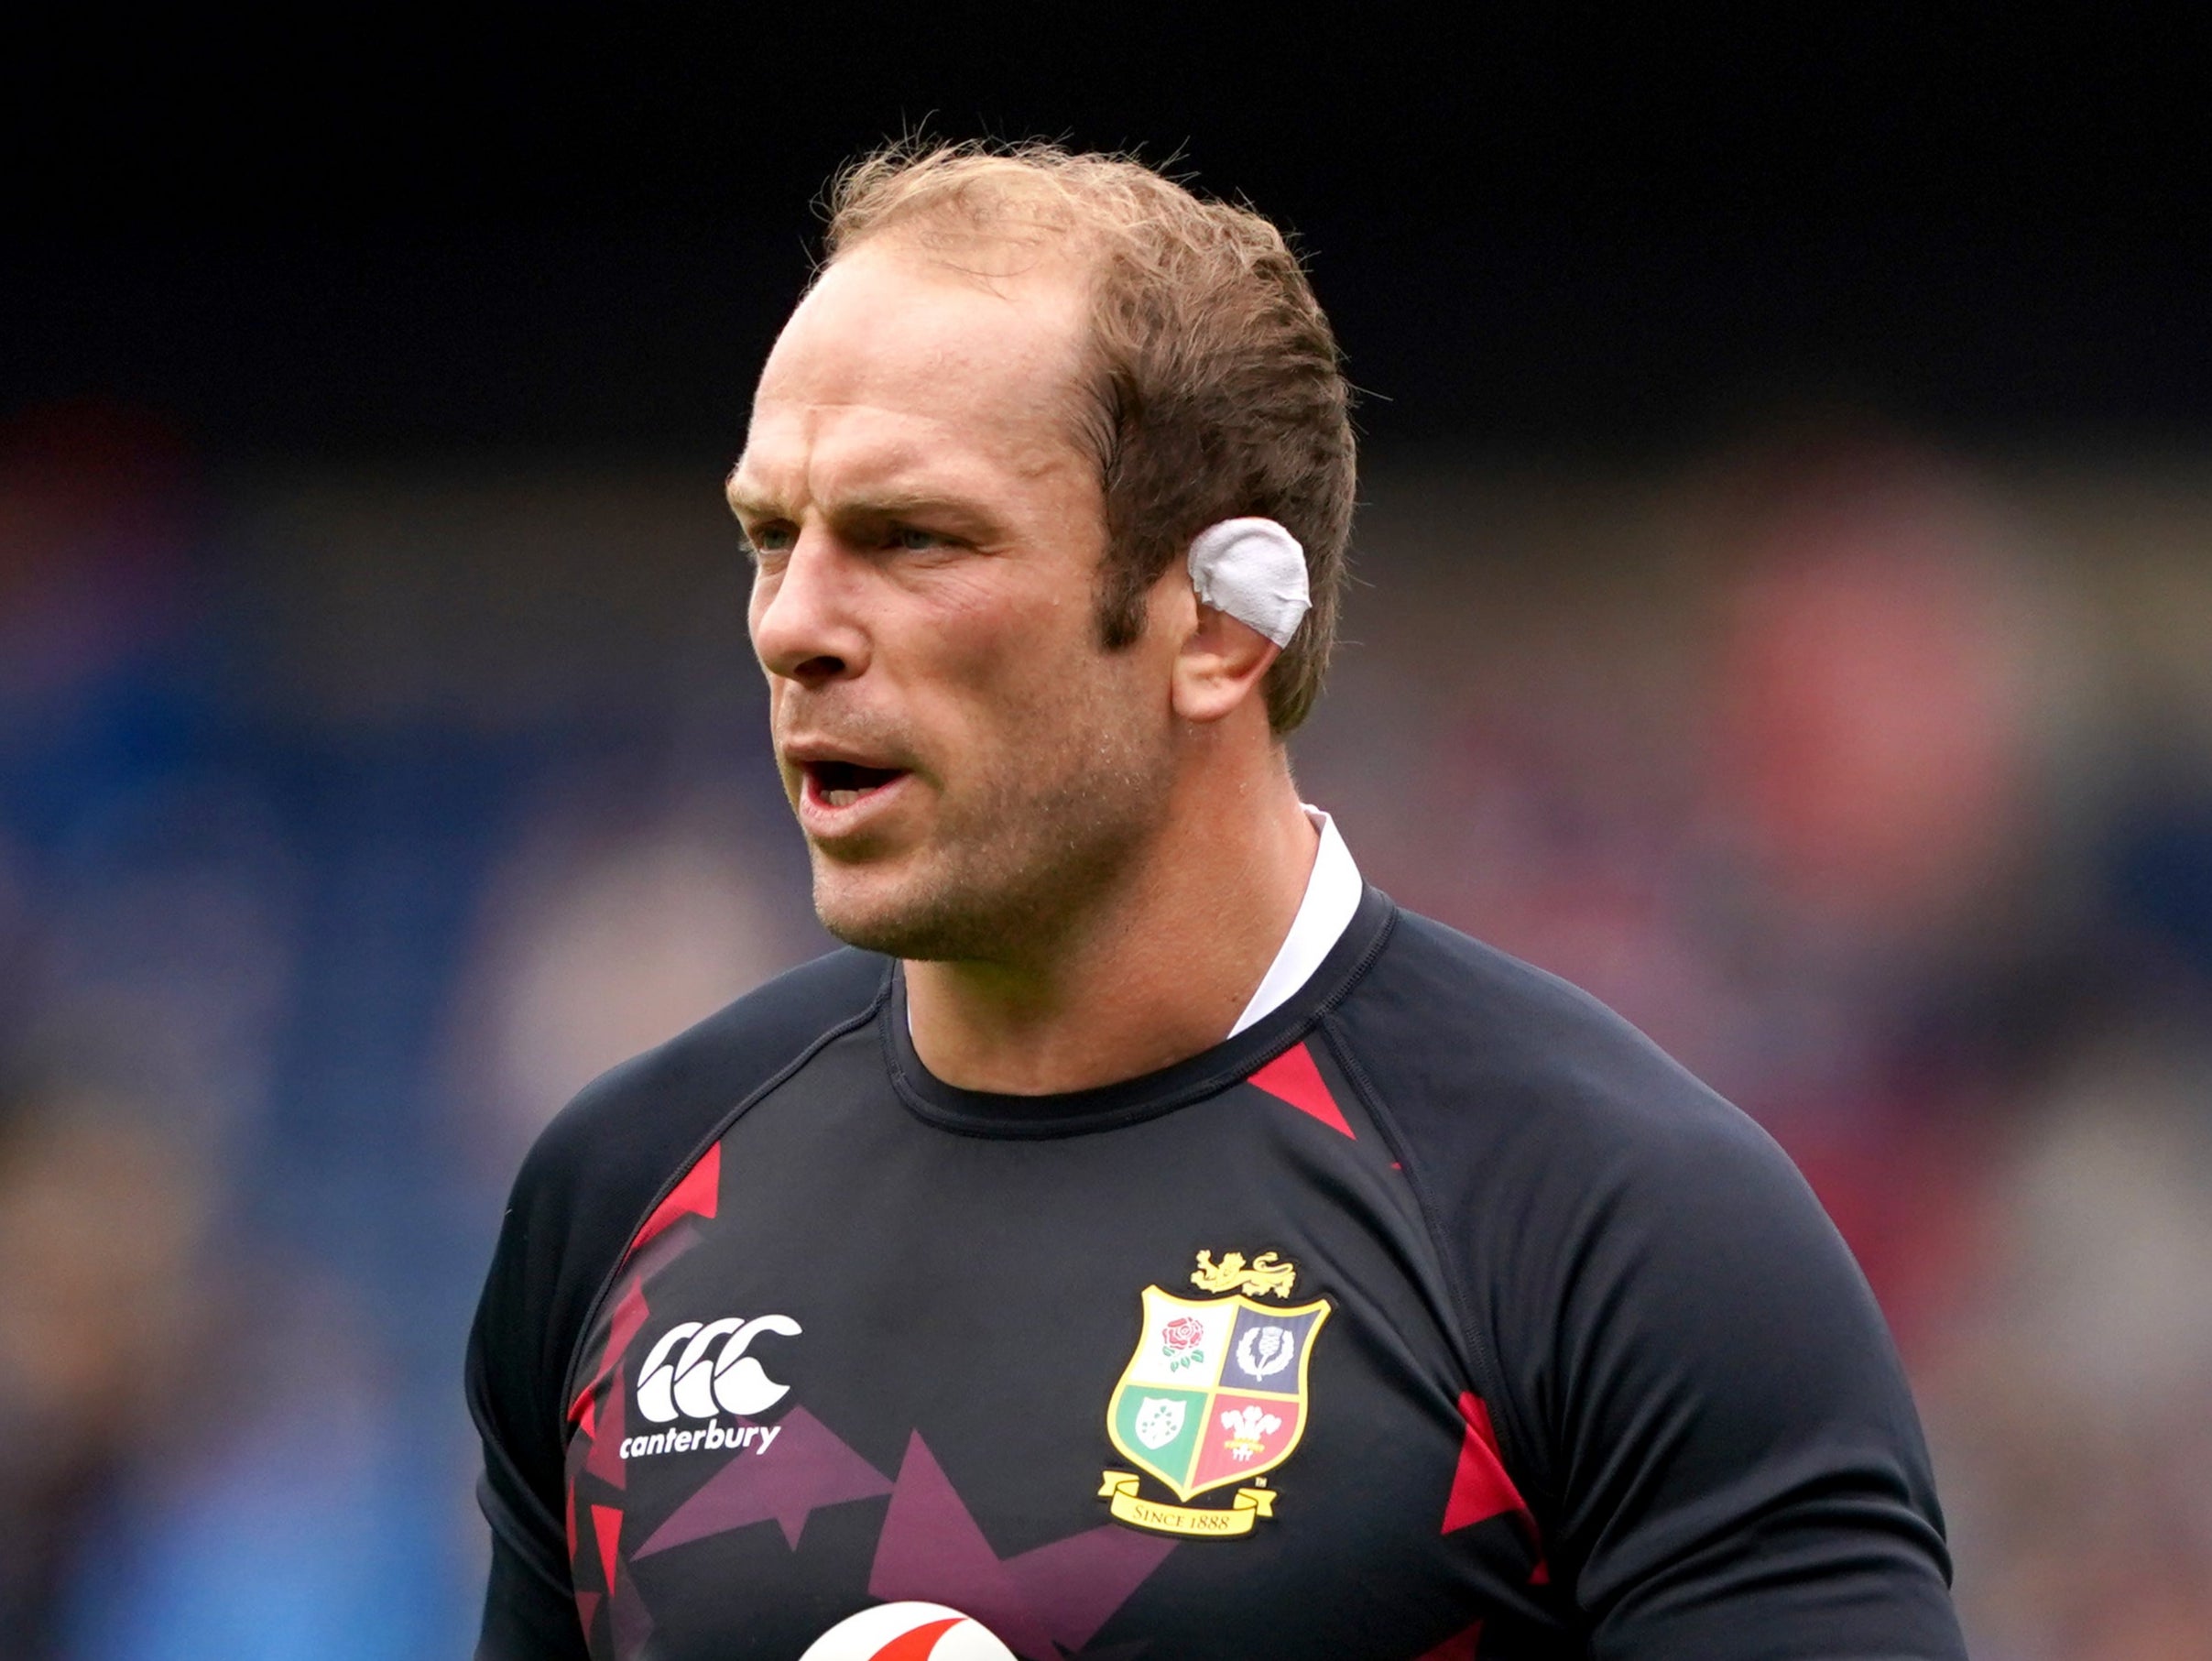 Alun Wyn Jones will lead the Lions against South Africa on Saturday